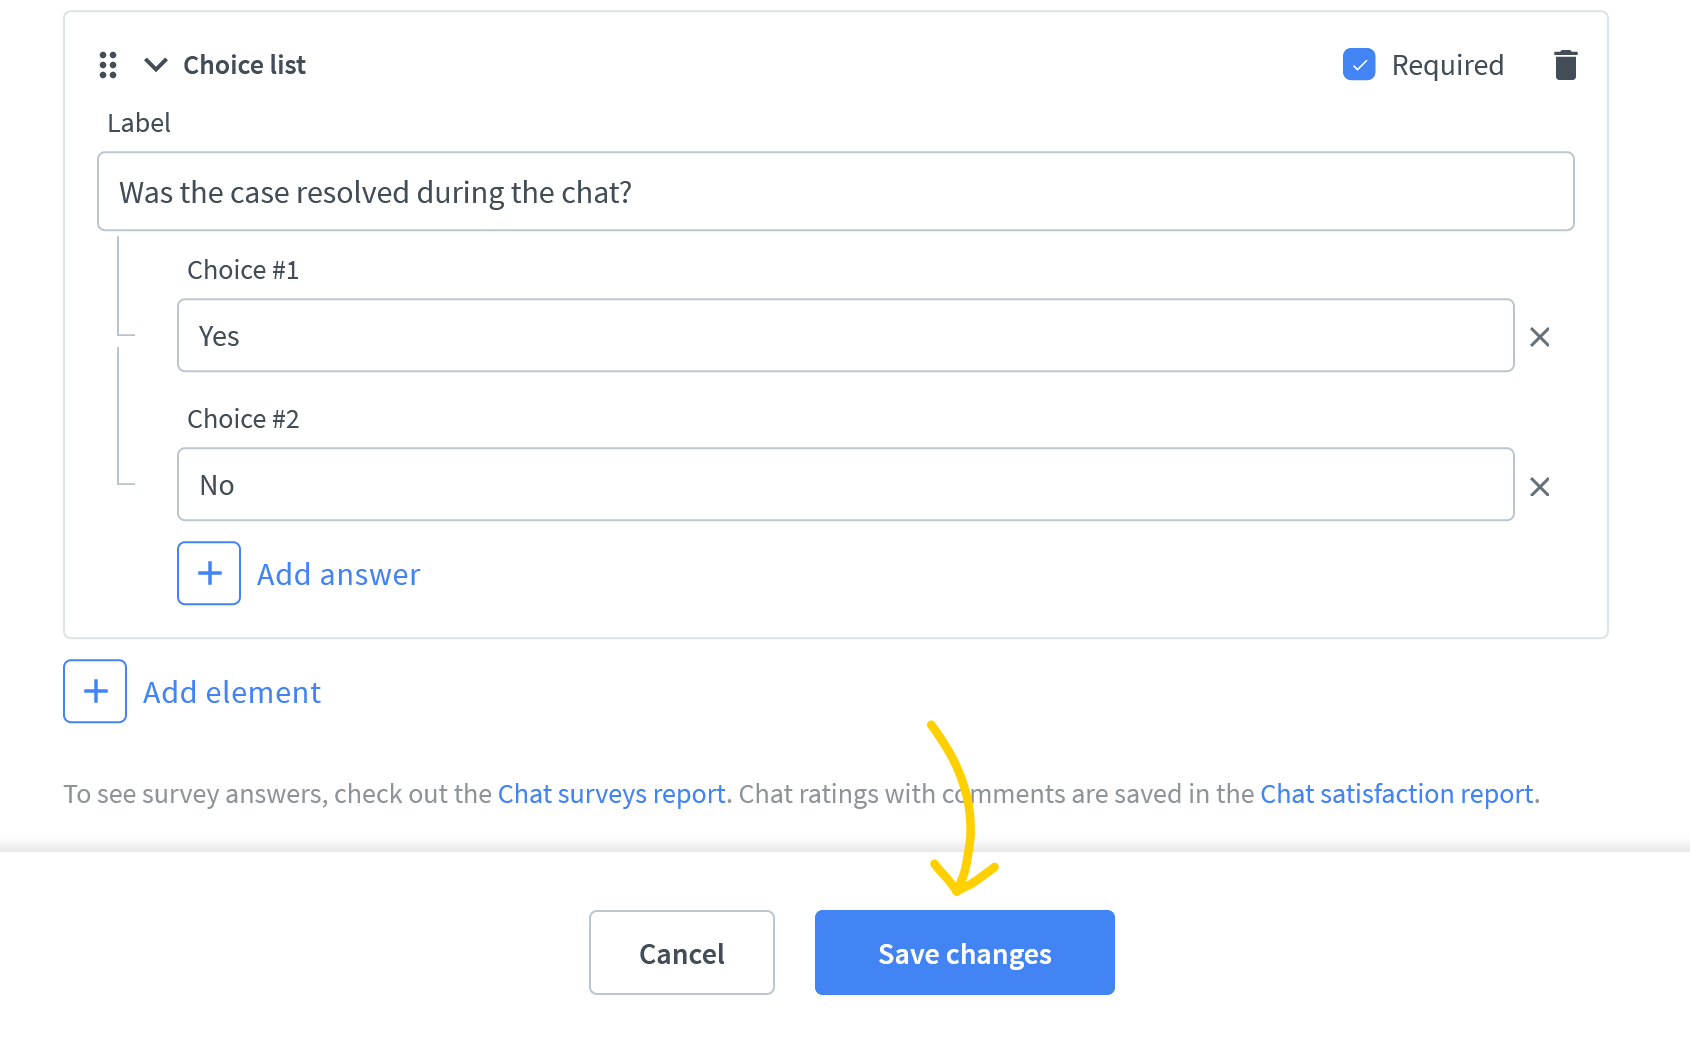 Save changes made to post-chat form